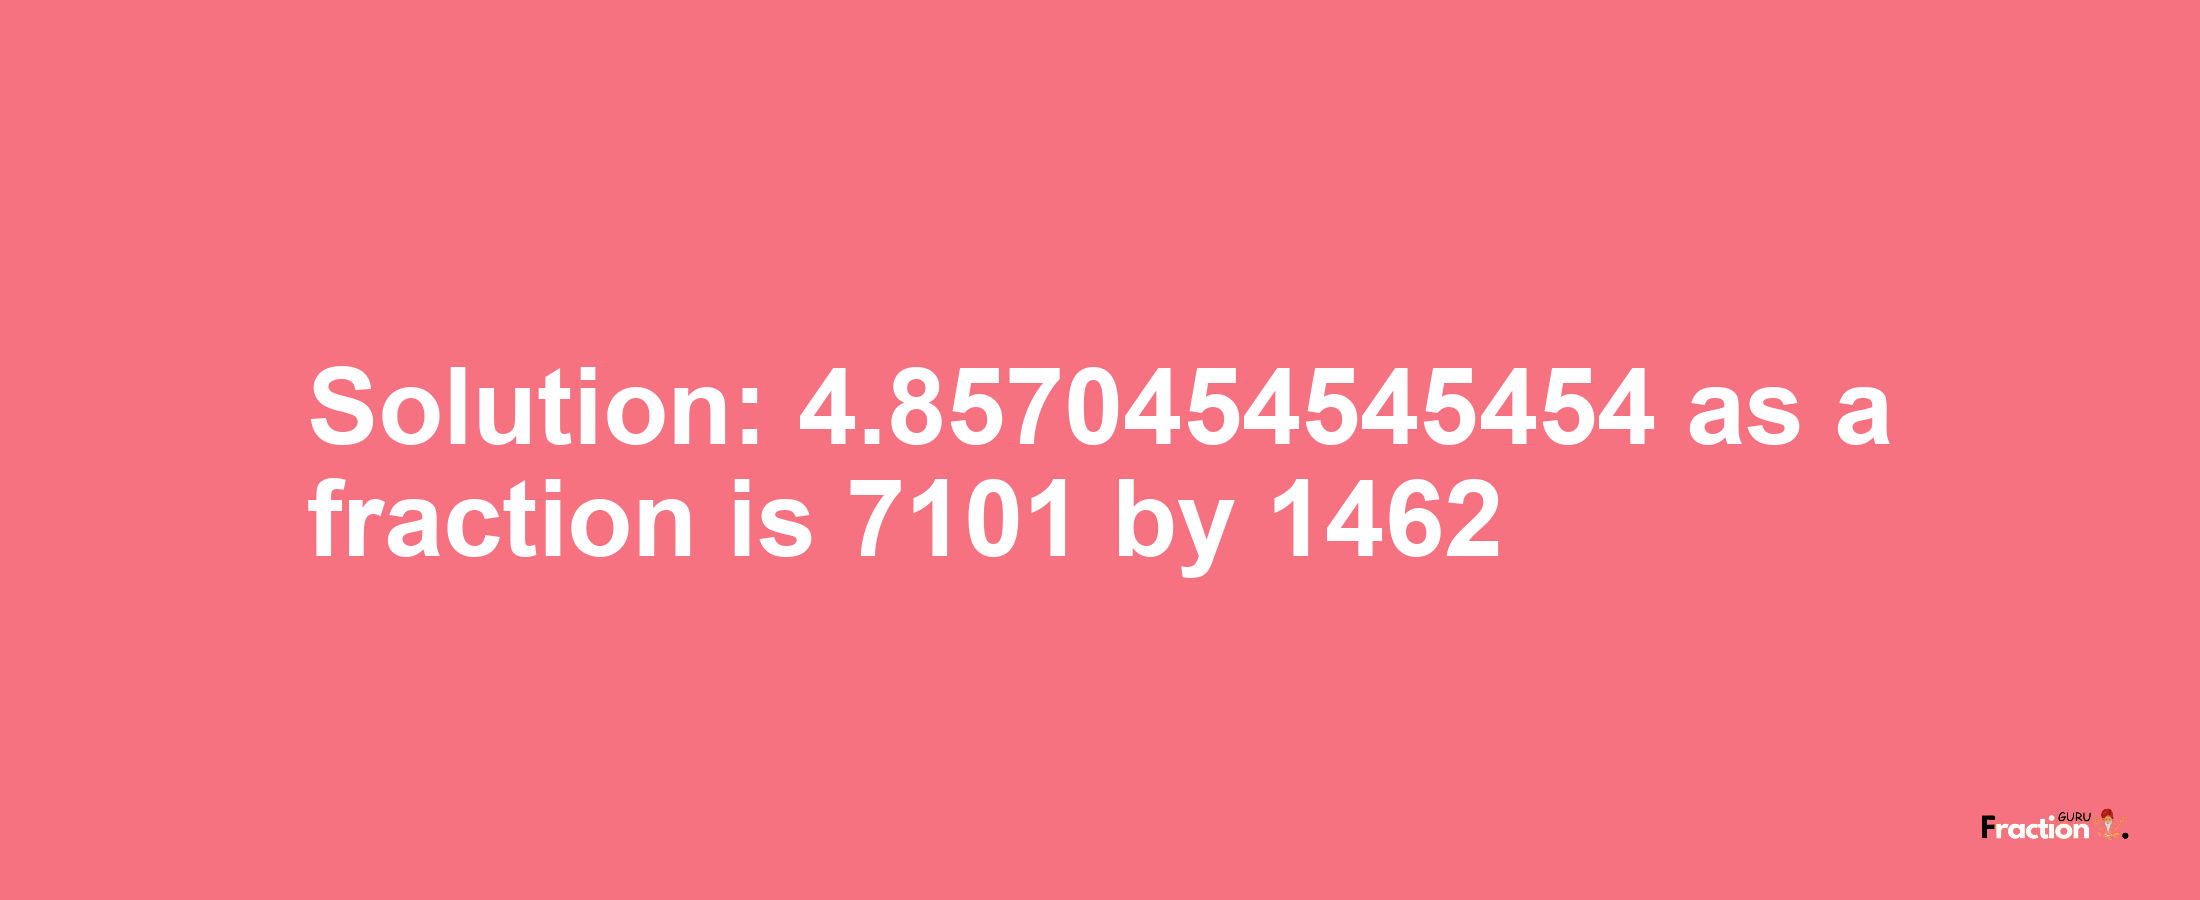 Solution:4.8570454545454 as a fraction is 7101/1462